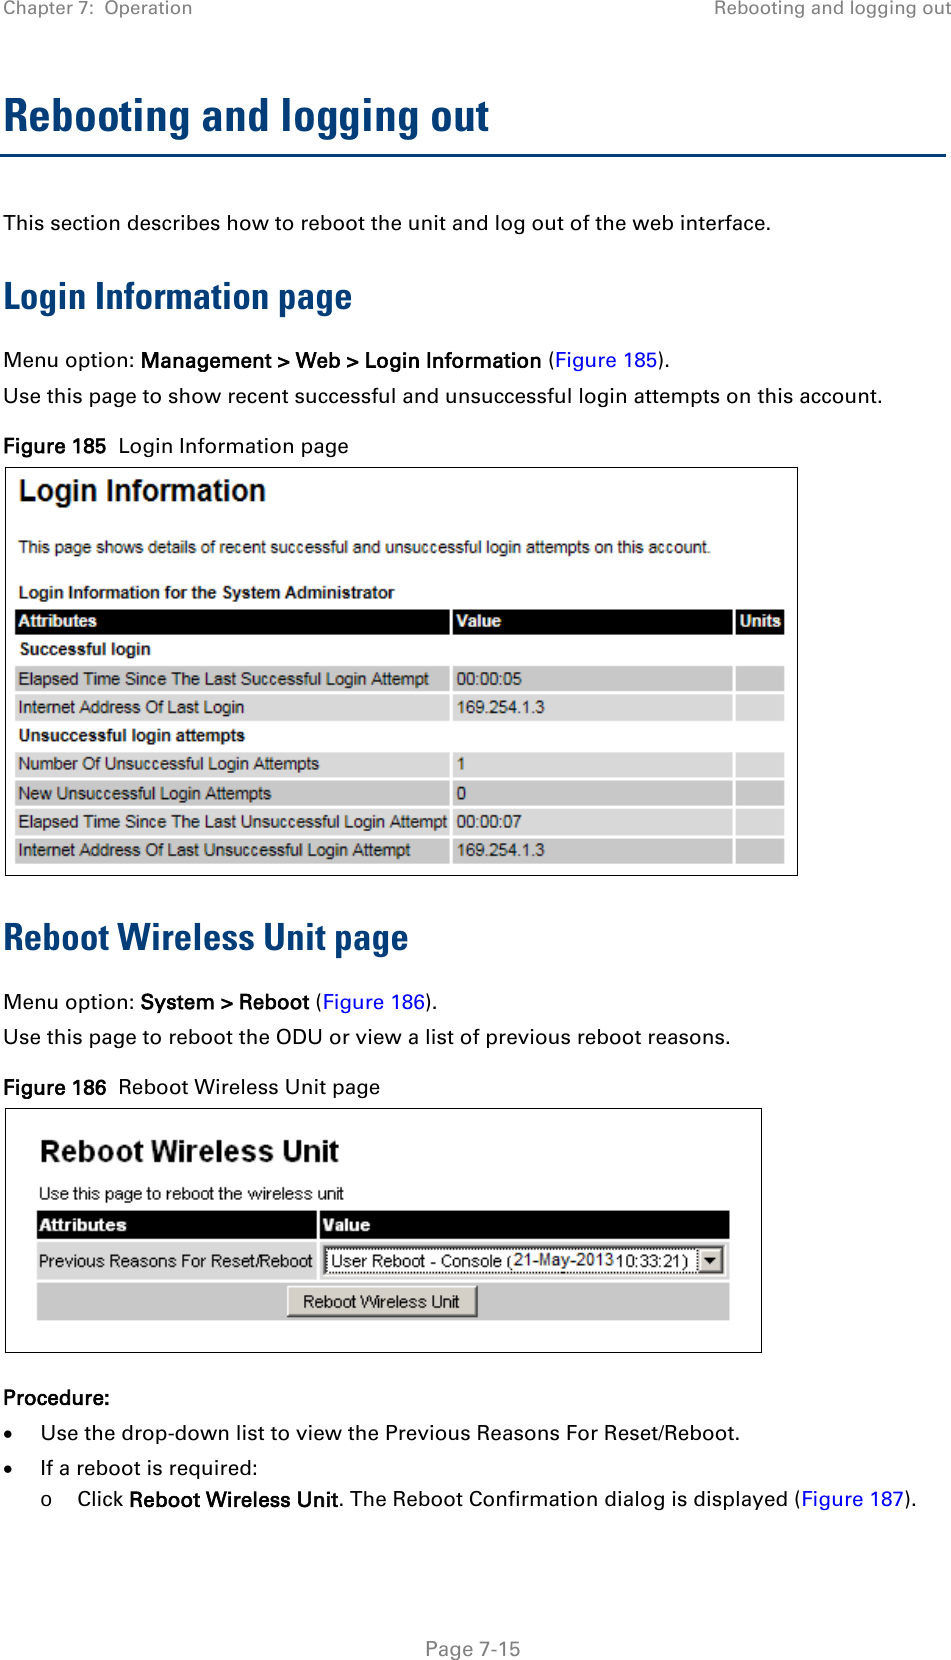 Chapter 7:  Operation Rebooting and logging out  Rebooting and logging out This section describes how to reboot the unit and log out of the web interface. Login Information page Menu option: Management &gt; Web &gt; Login Information (Figure 185). Use this page to show recent successful and unsuccessful login attempts on this account. Figure 185  Login Information page  Reboot Wireless Unit page Menu option: System &gt; Reboot (Figure 186). Use this page to reboot the ODU or view a list of previous reboot reasons. Figure 186  Reboot Wireless Unit page  Procedure: • Use the drop-down list to view the Previous Reasons For Reset/Reboot. • If a reboot is required: o Click Reboot Wireless Unit. The Reboot Confirmation dialog is displayed (Figure 187).  Page 7-15 